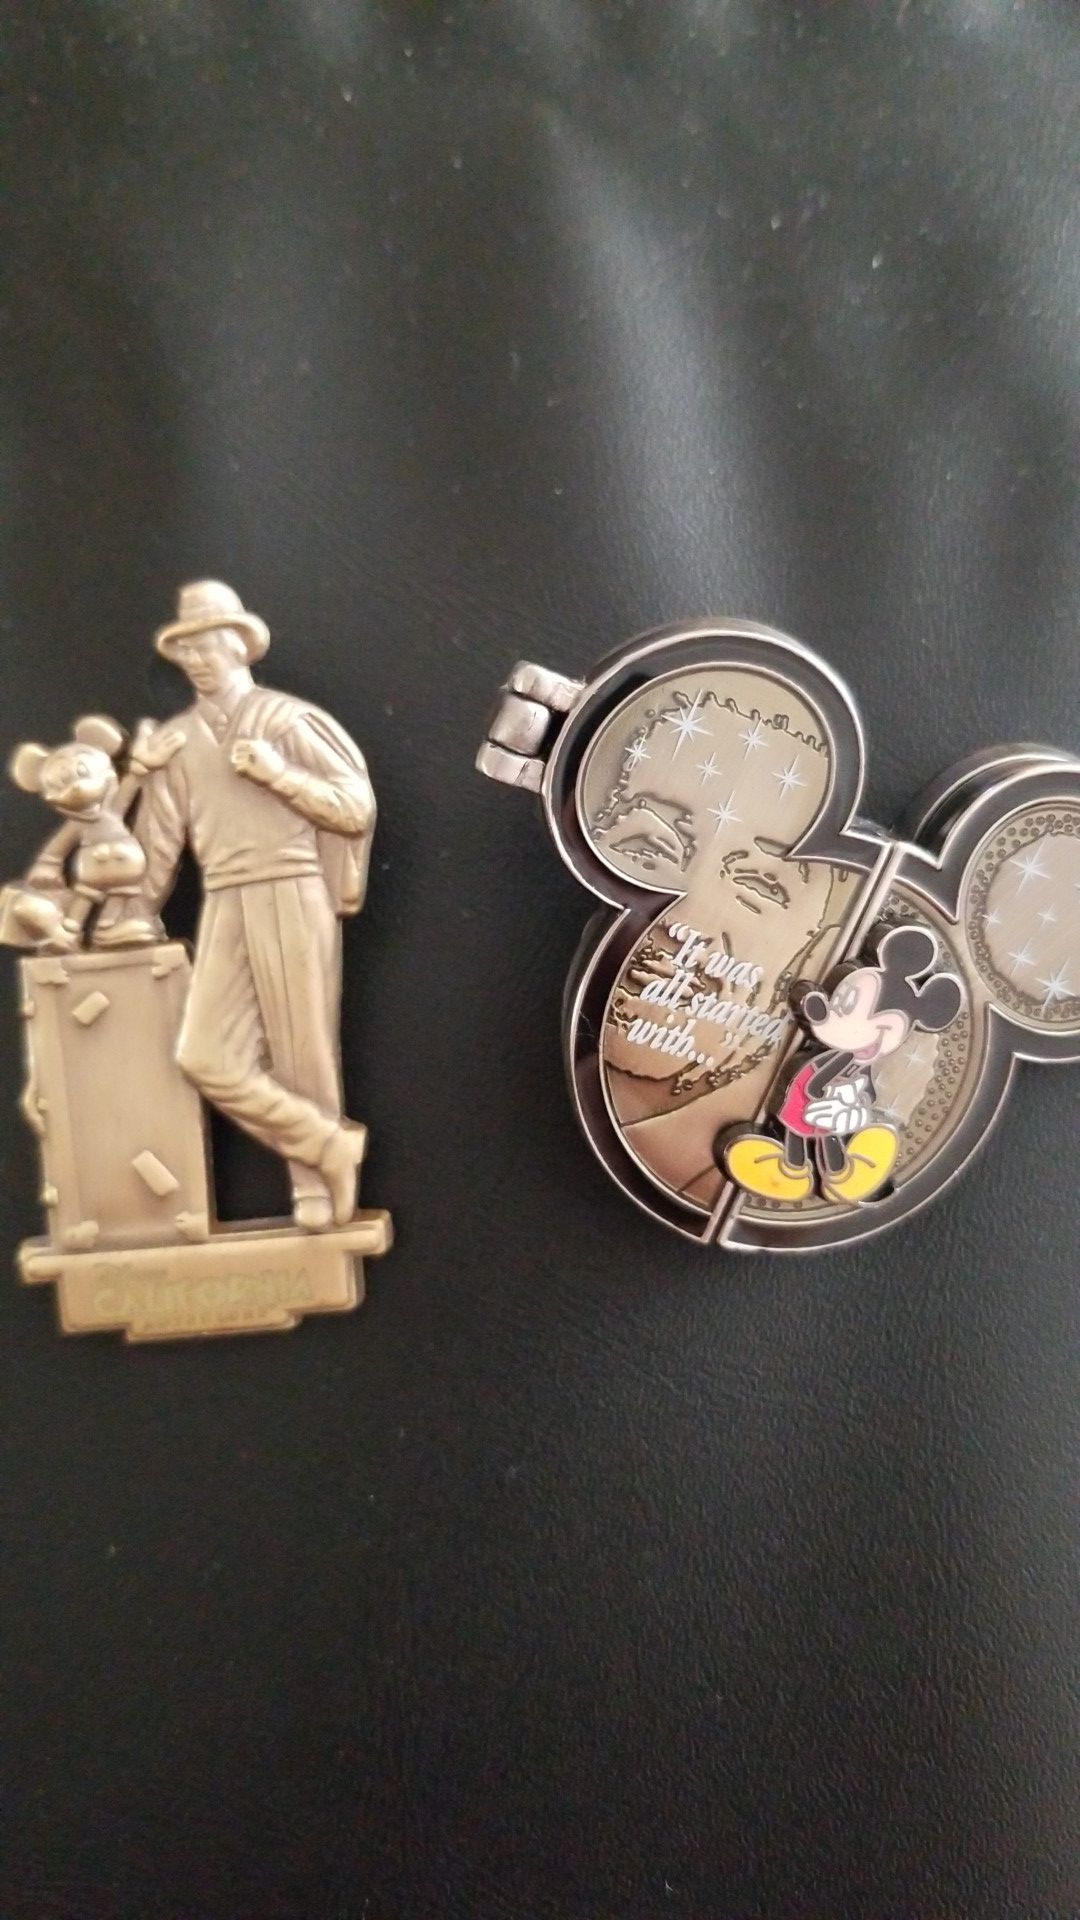 Collector Disney Pins featuring Walt and Mickey